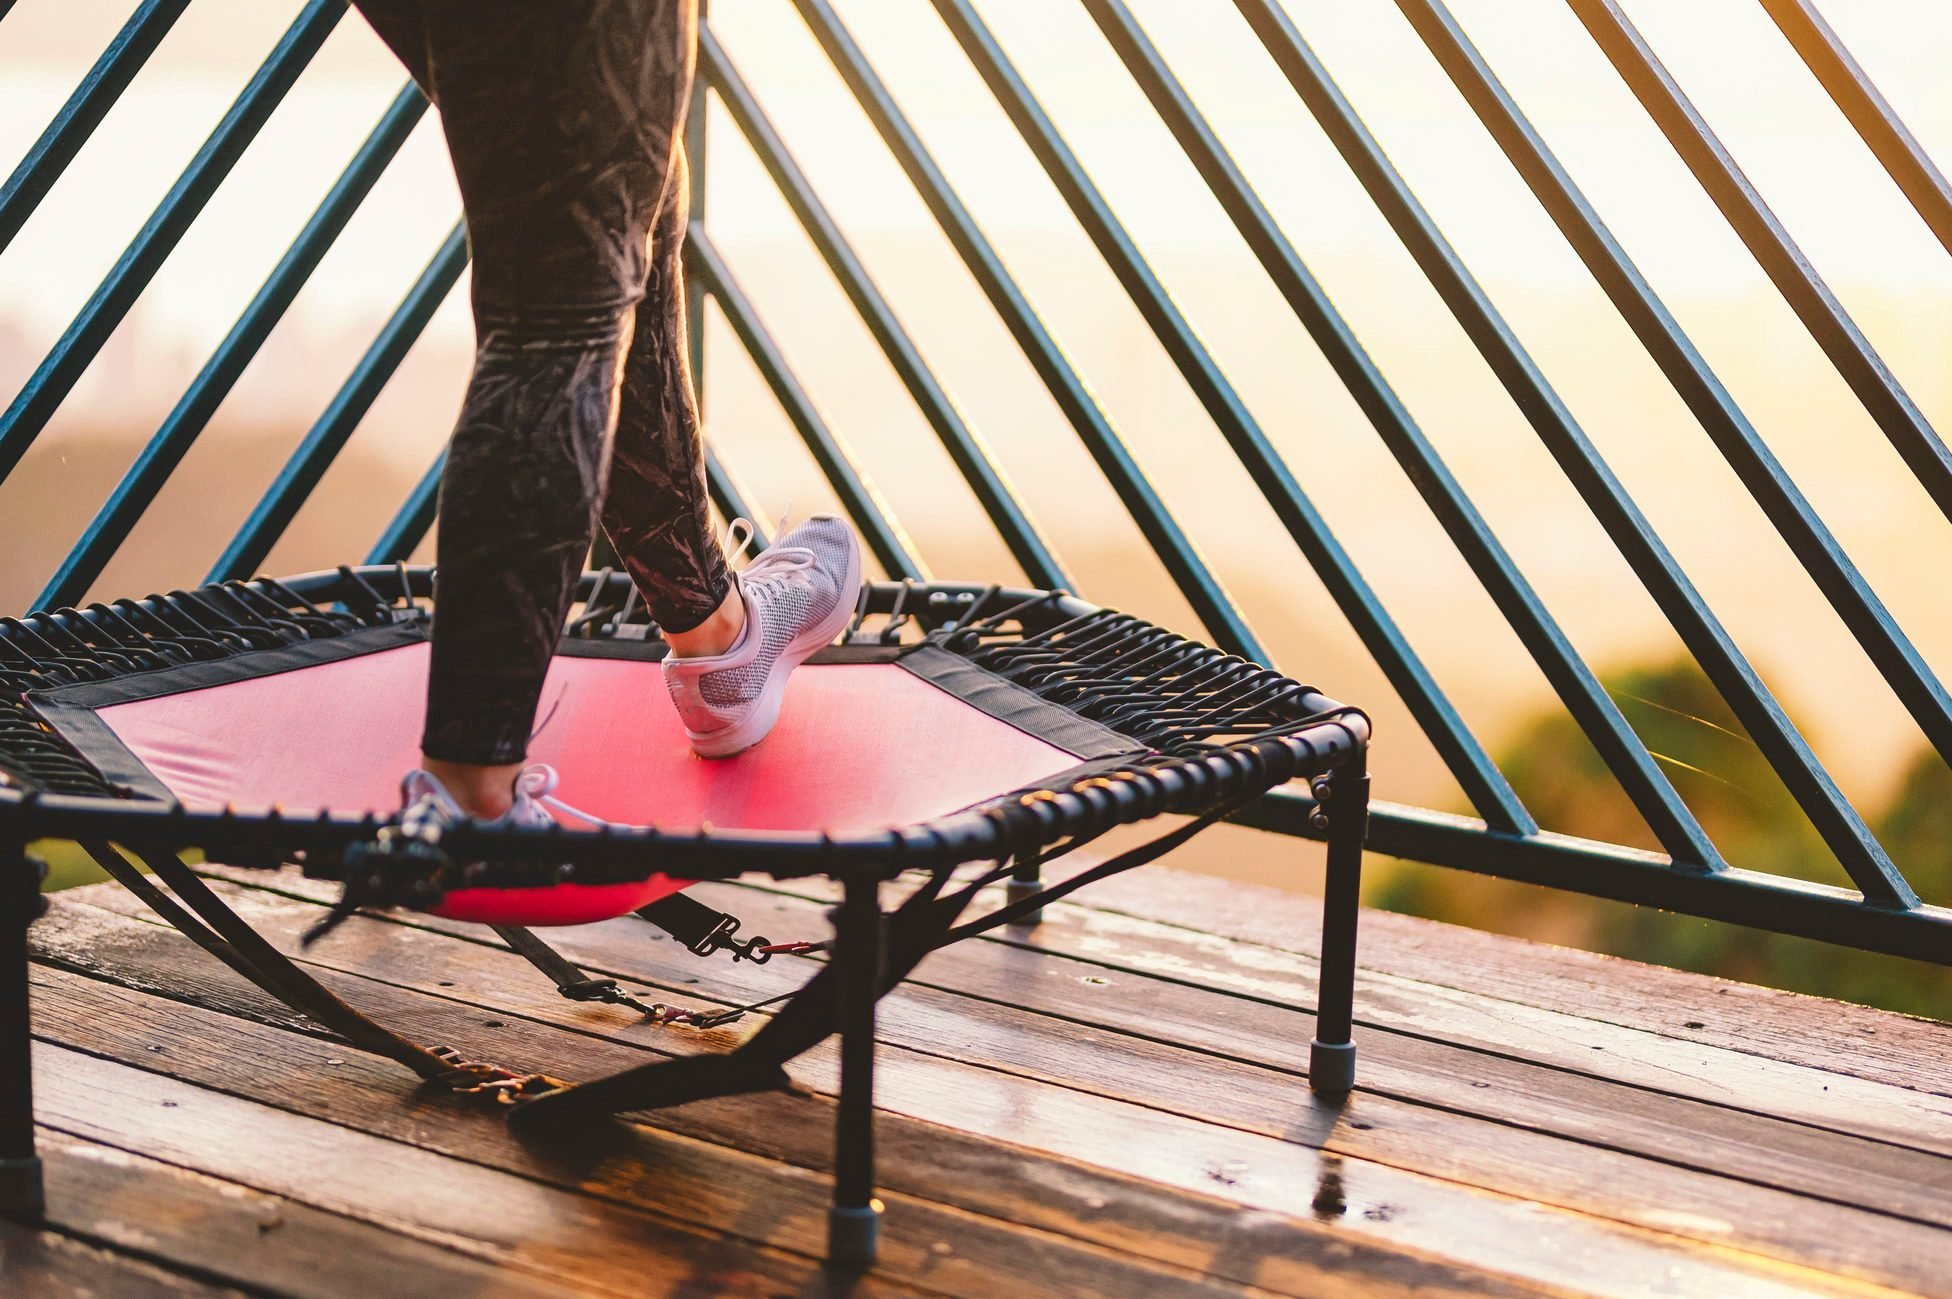 I Tried a Rebounder Trampoline for At-Home Workouts and Here’s What It’s Like